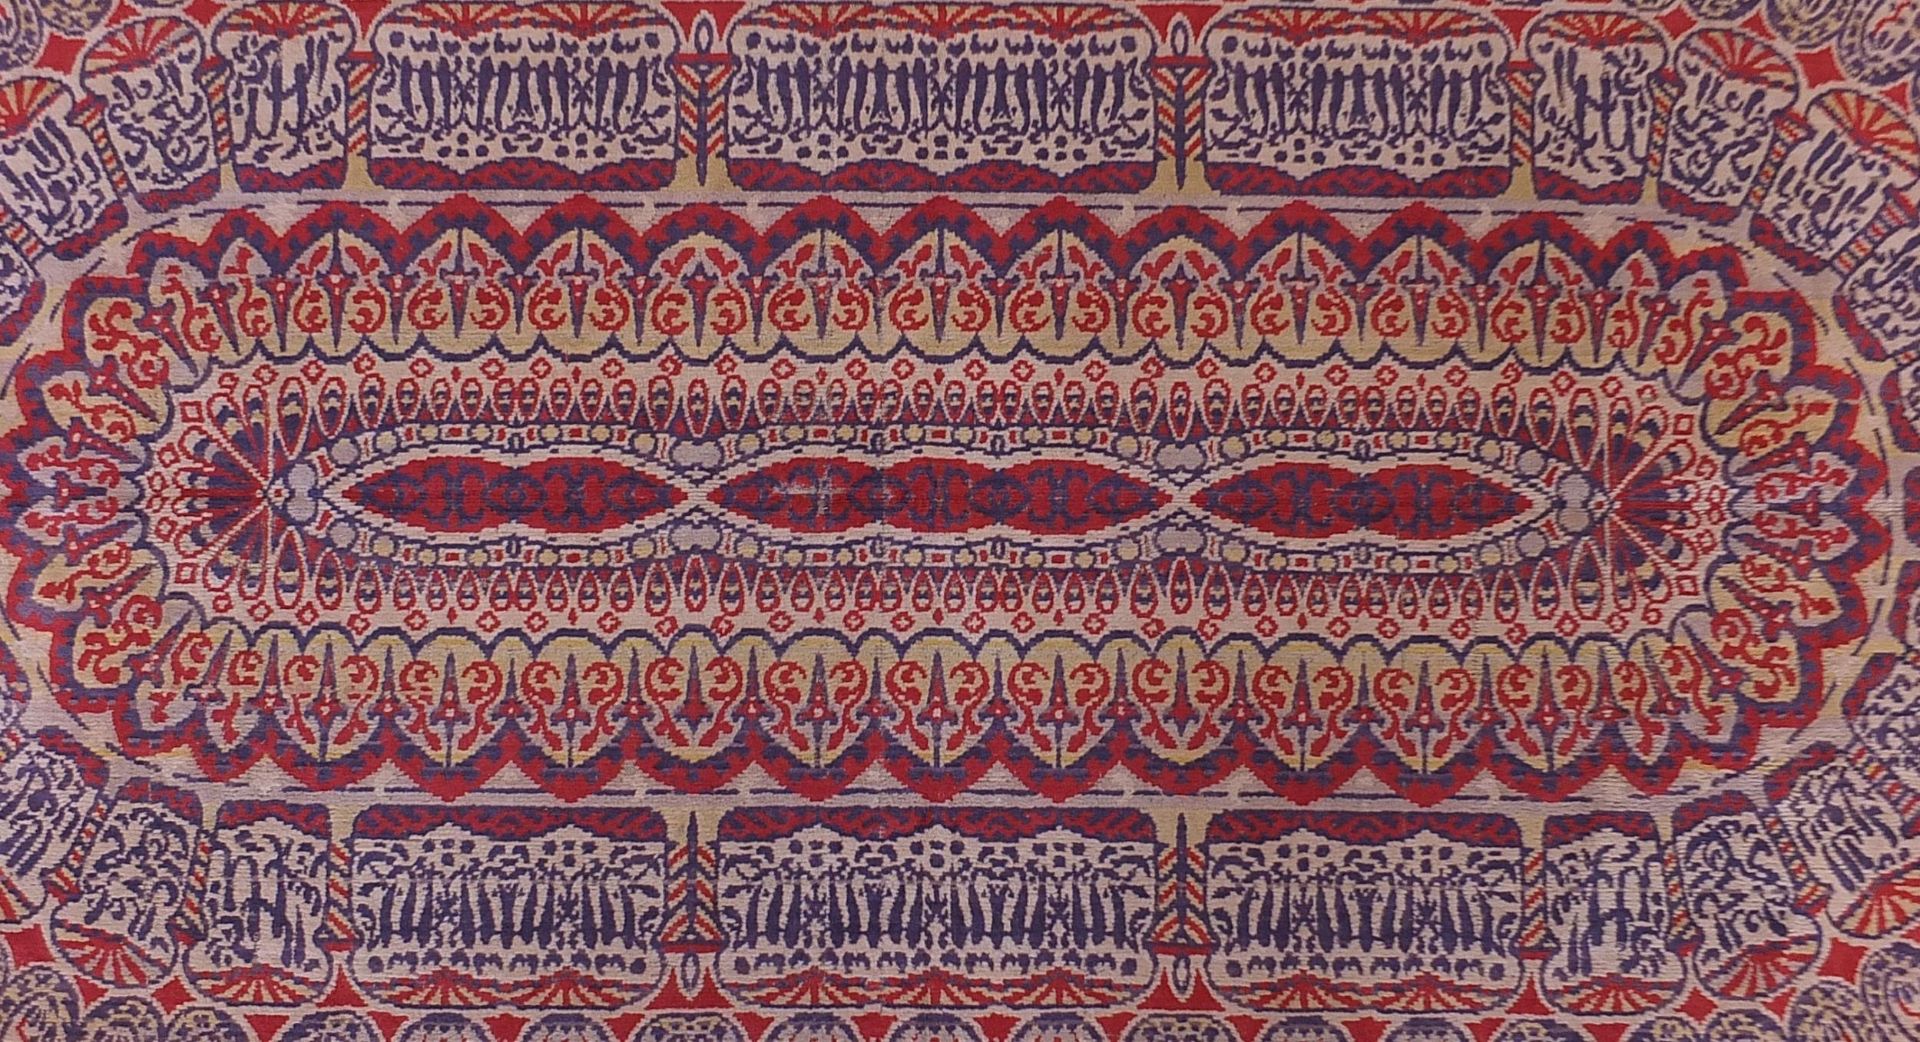 Turkish rug decorated with flowers and roundels, 200cm x 124cm - Image 2 of 4